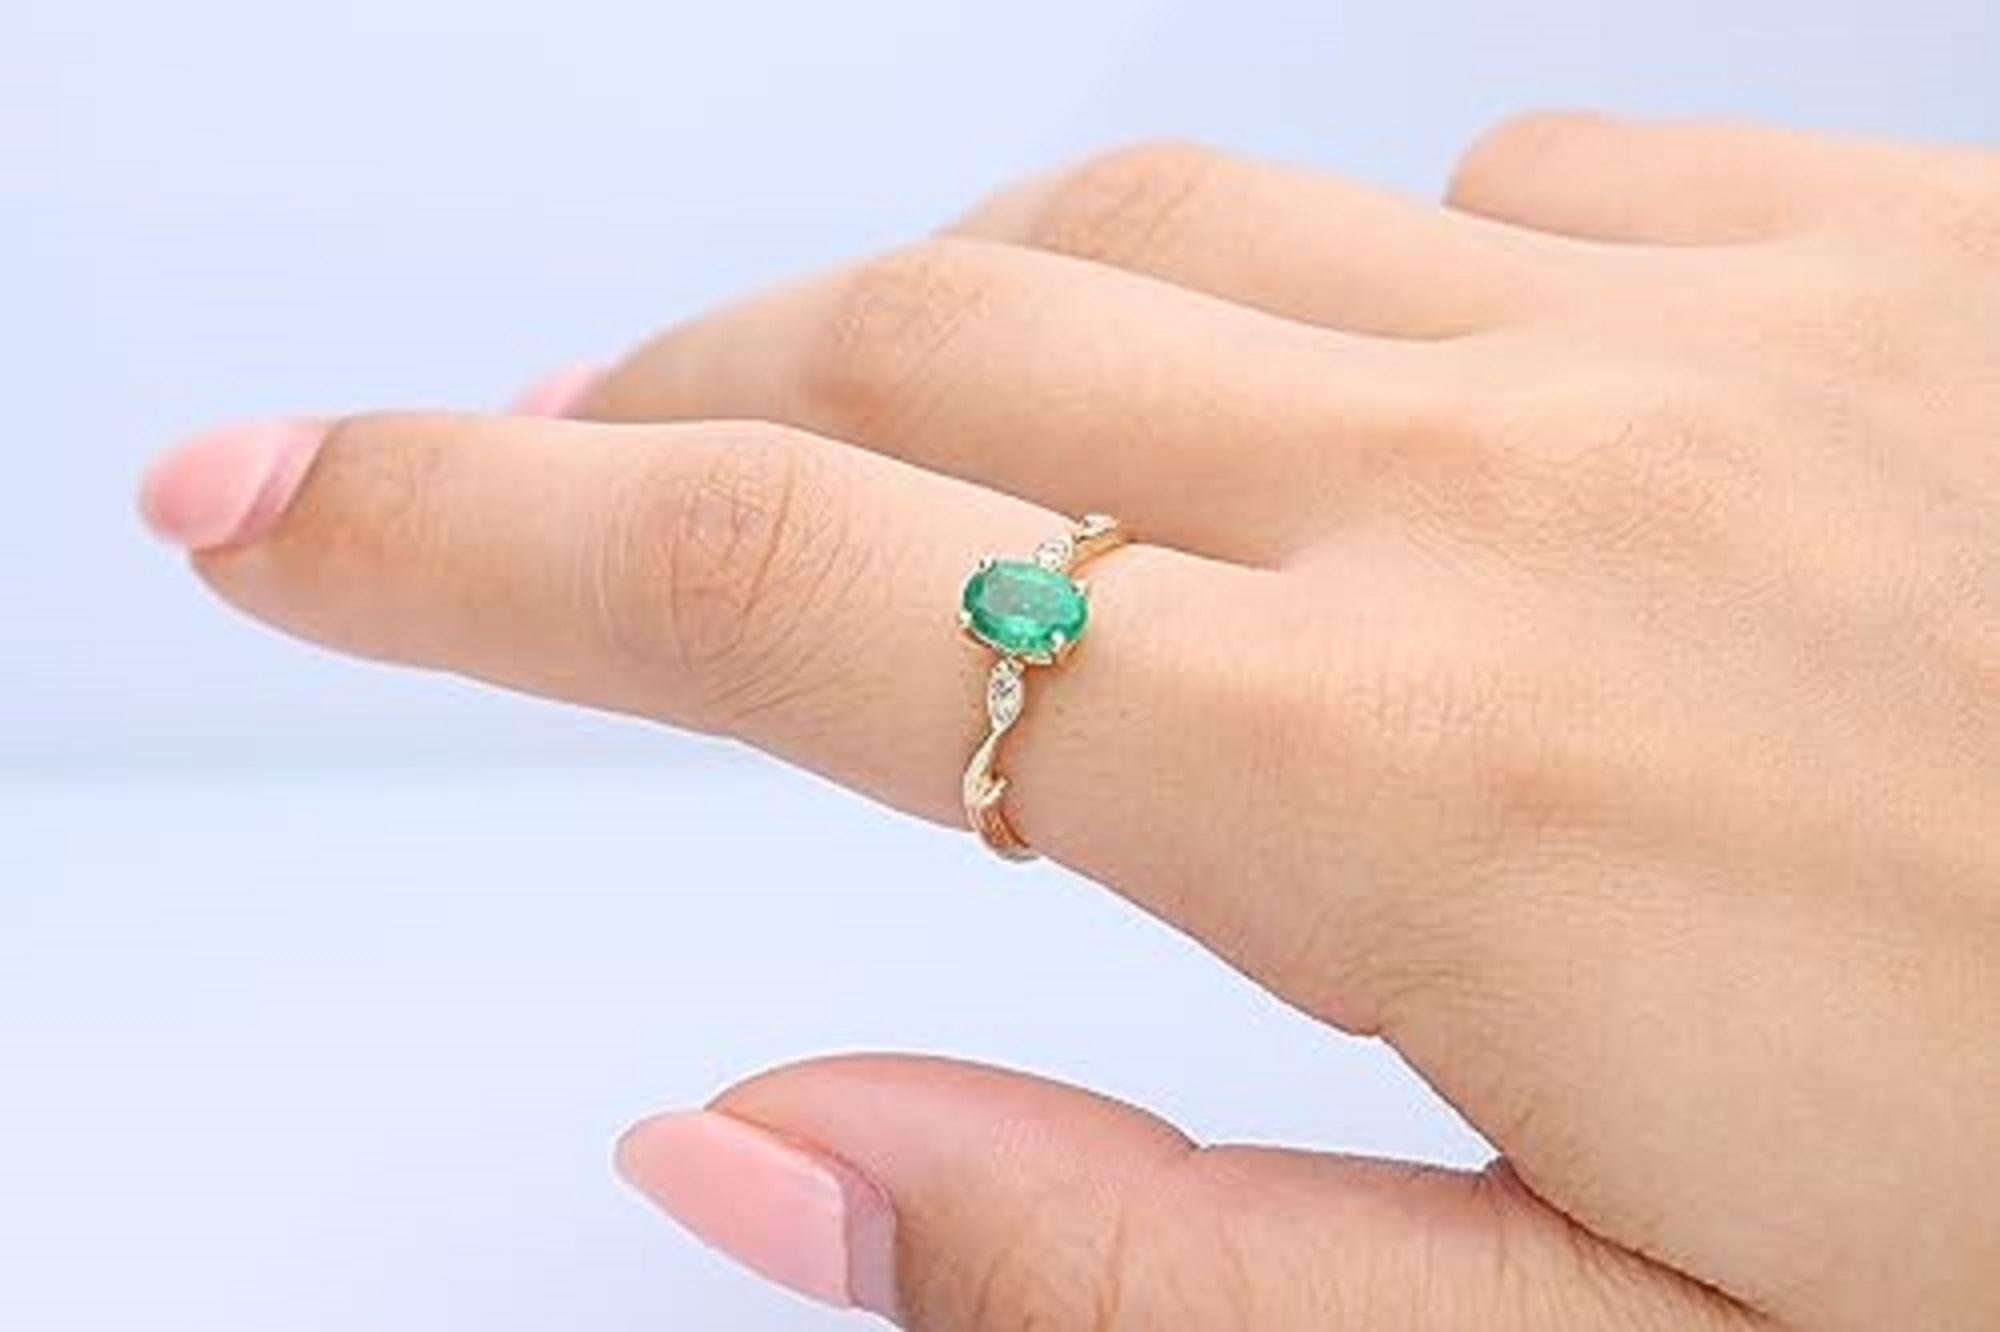 Decorate yourself in elegance with this Ring is crafted from 14-karat Yellow gold 5*7 Oval-Cut Emerald (1 pcs) 0.79 carat and Round-cut White Diamond (4 Pcs) 0.03 carat. This Ring is weight 1.78 grams. This delicate Ring is polished to a high finish